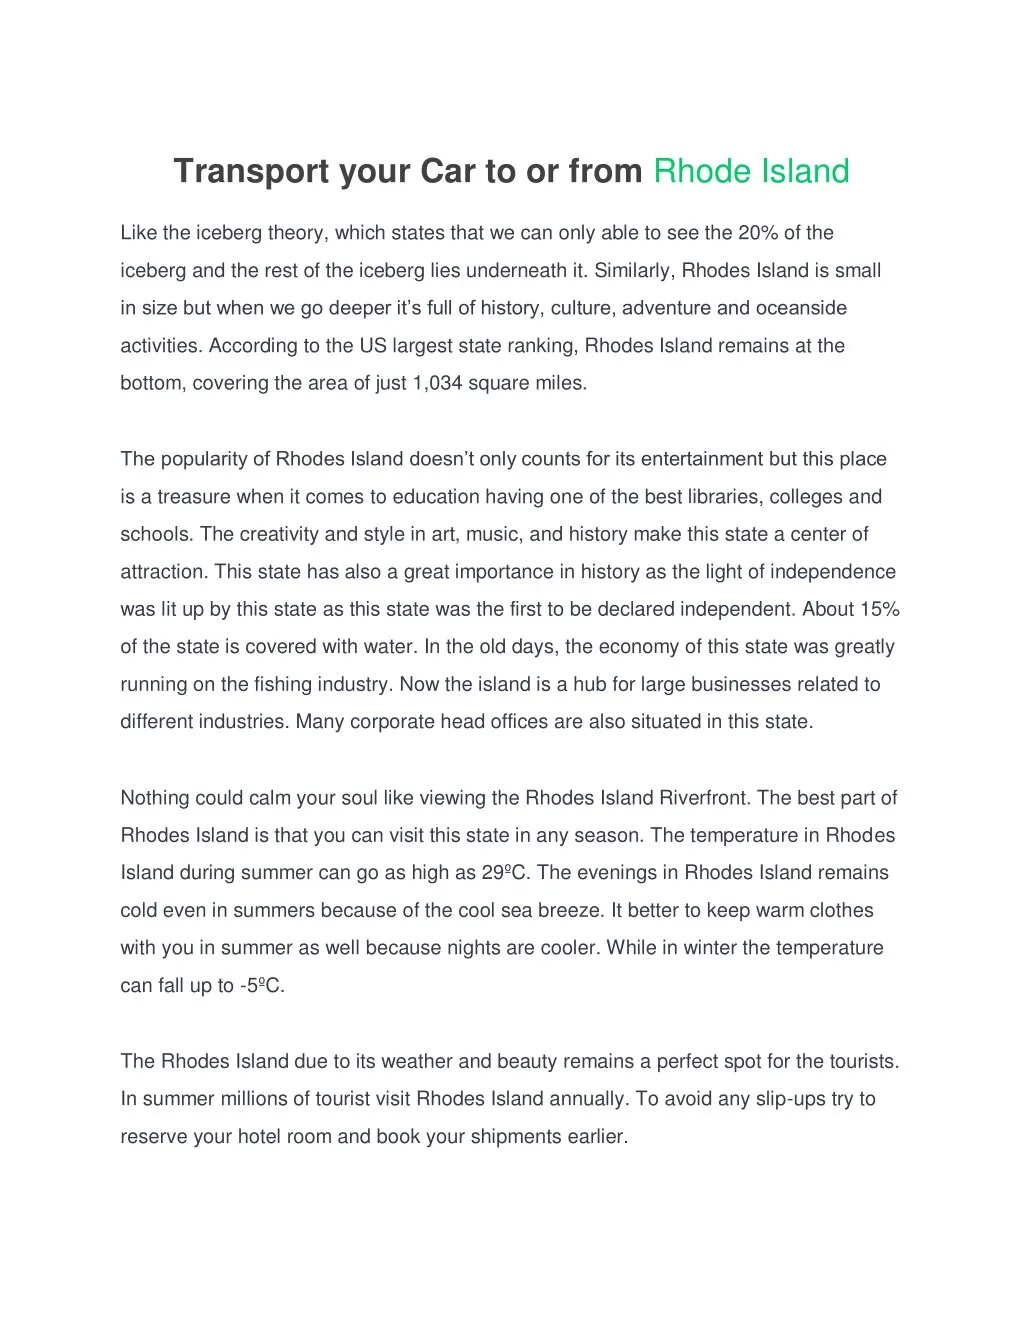 transport your car to or from rhode island